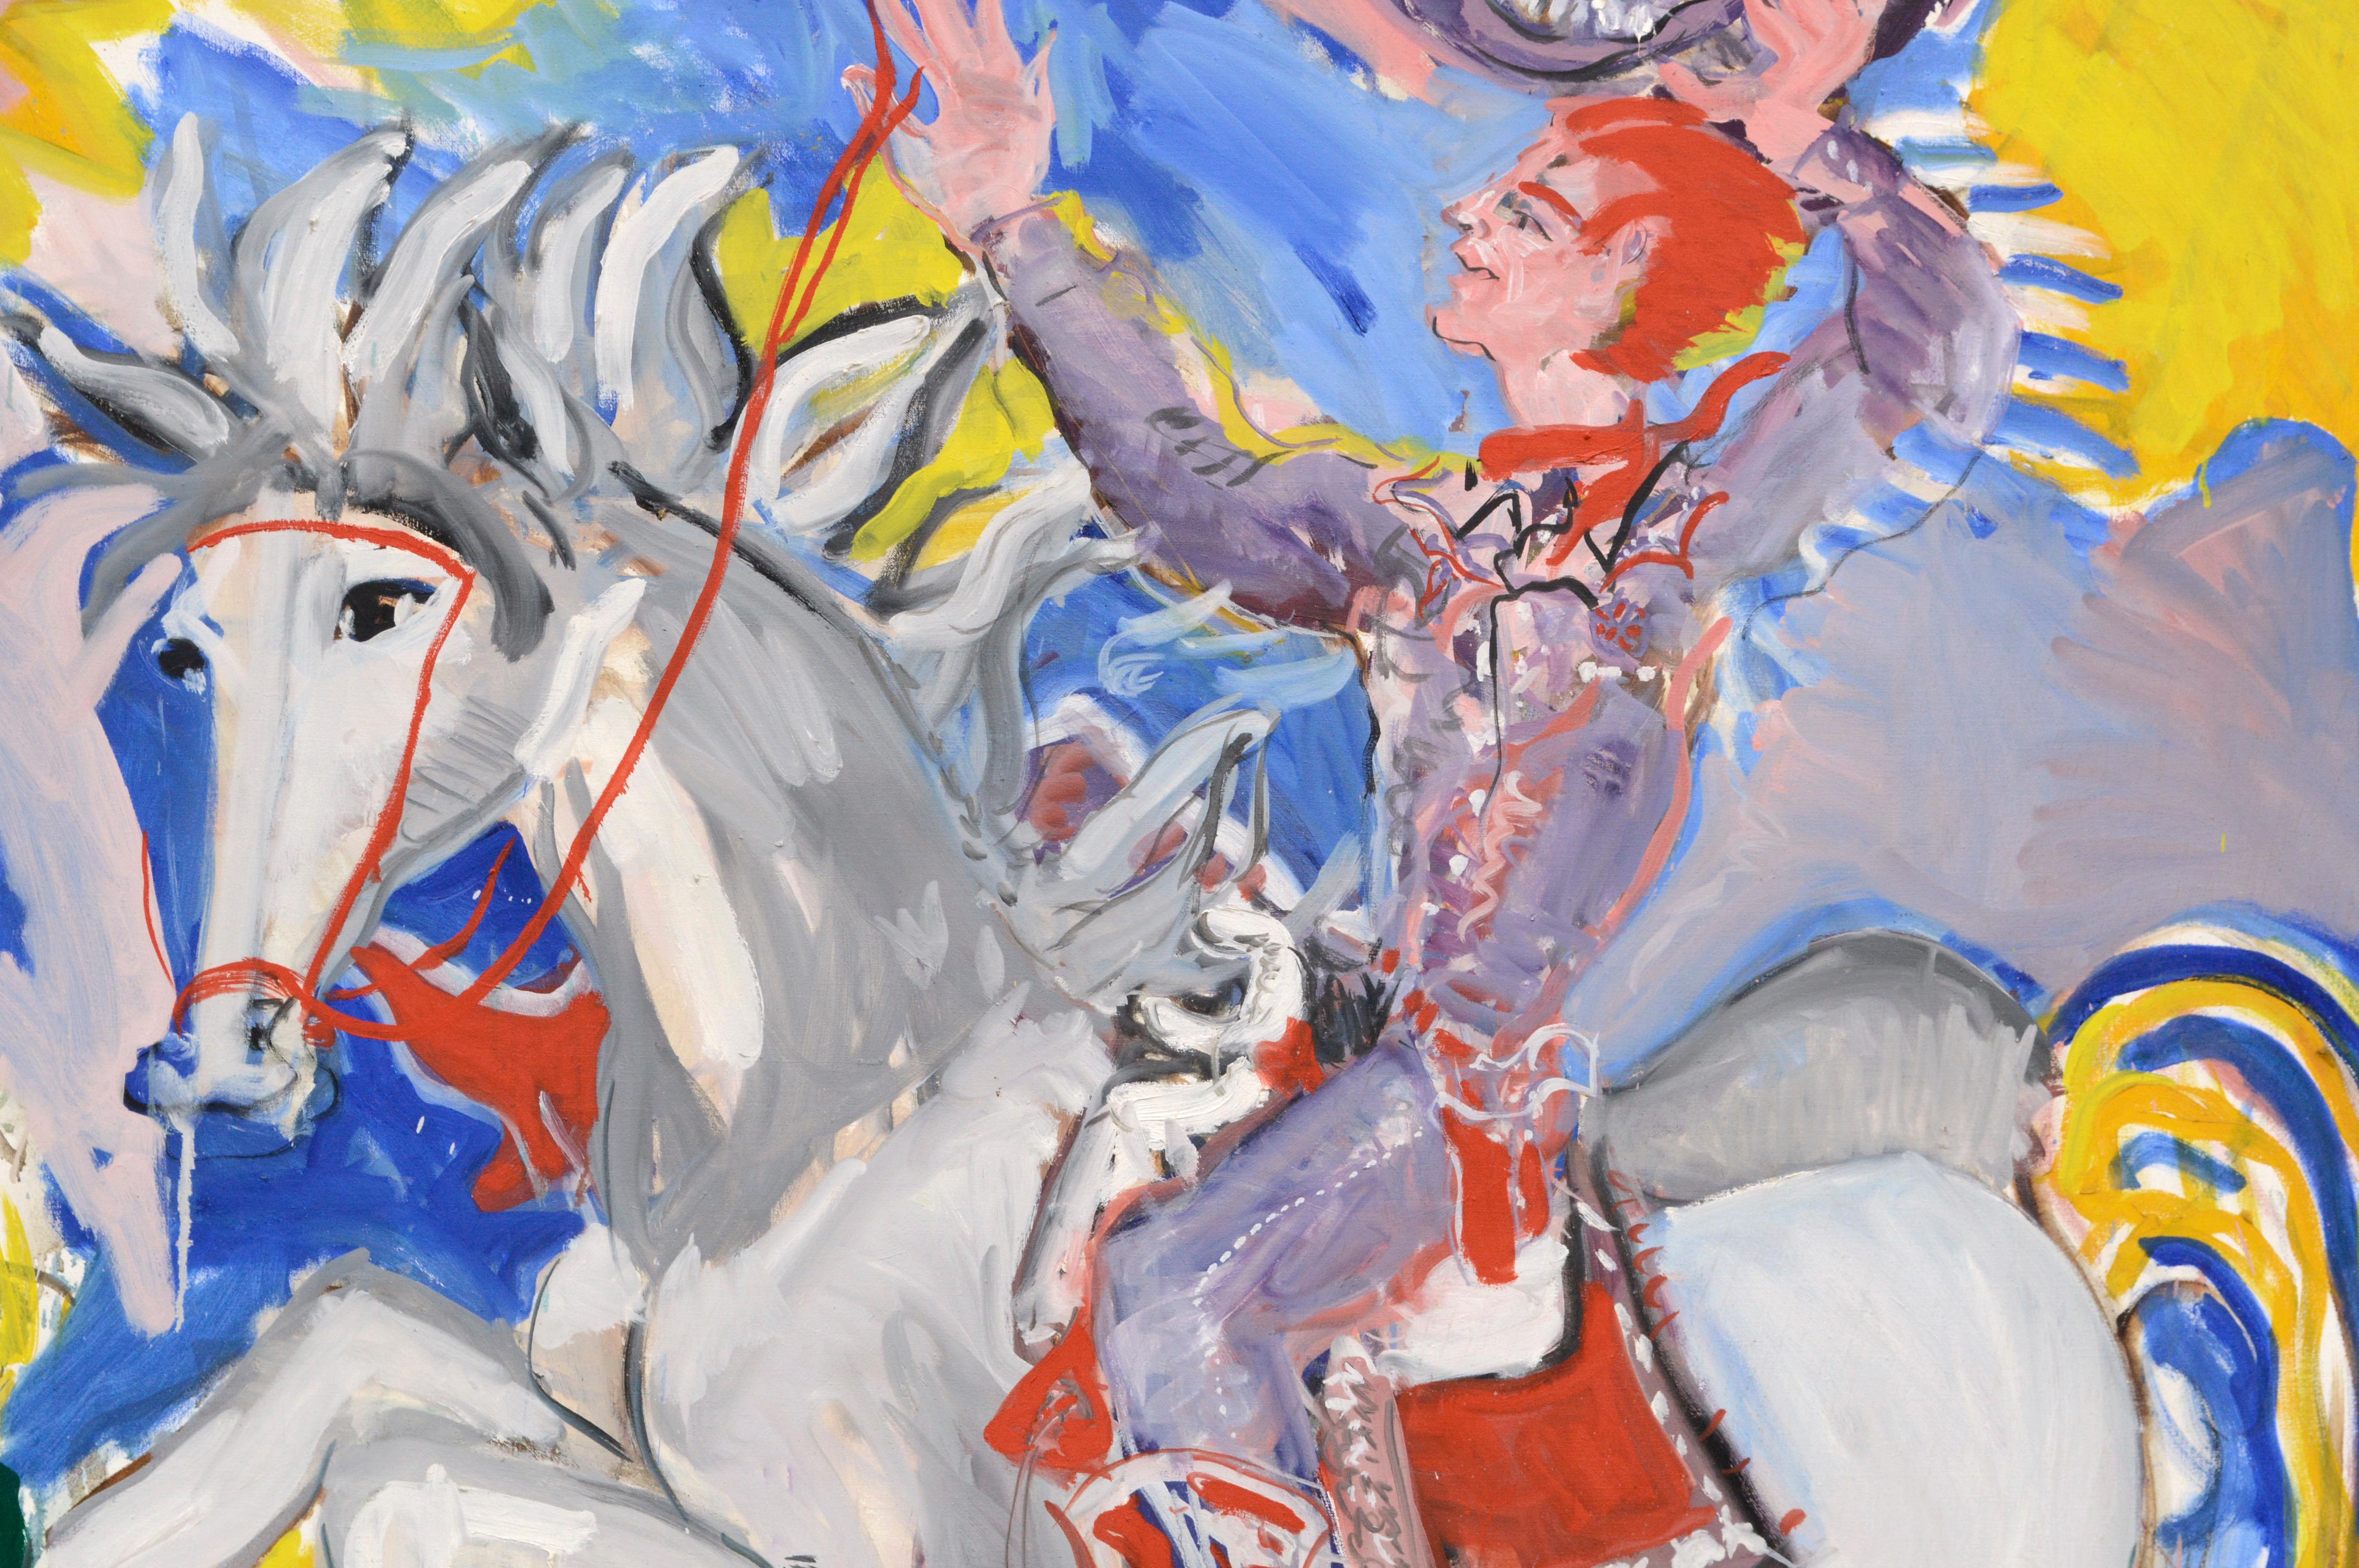 Red Haired Circus Cowboy - Expressionist Figurative Abstract with Horse  - Painting by Allie William Skelton